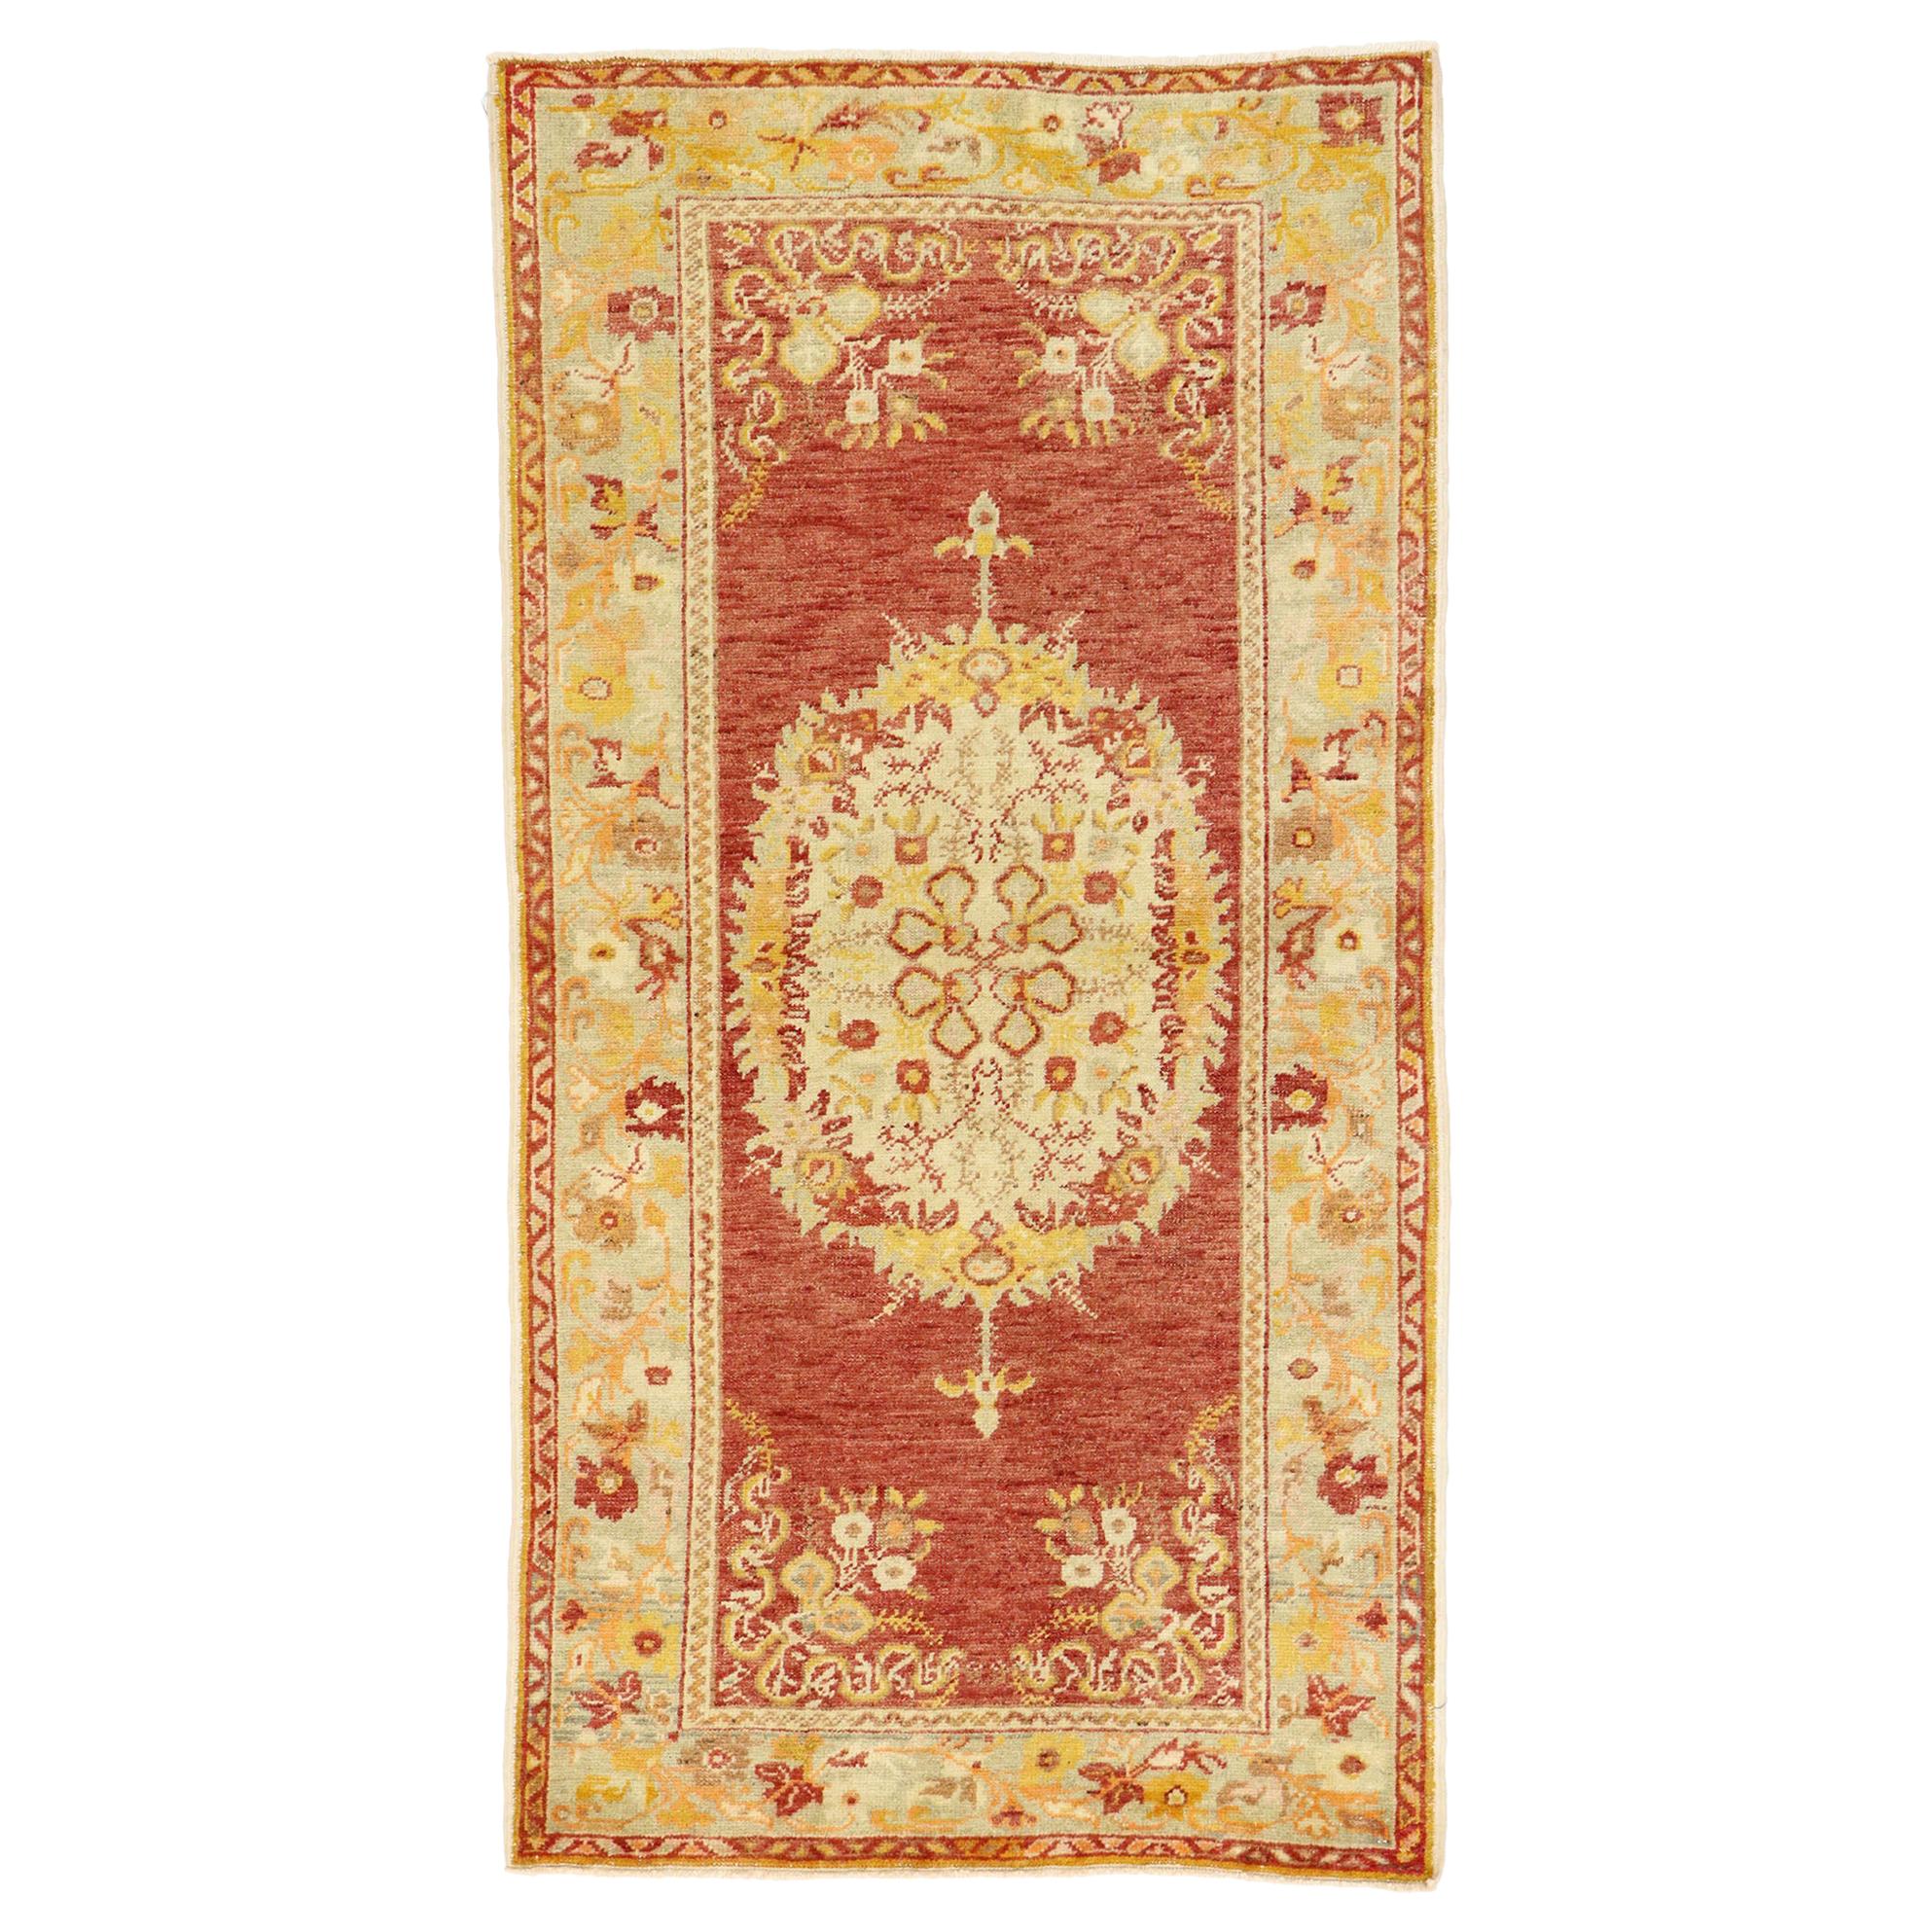 Vintage Turkish Oushak Rug with French Rococo Style, Kitchen, Foyer or Entry Rug